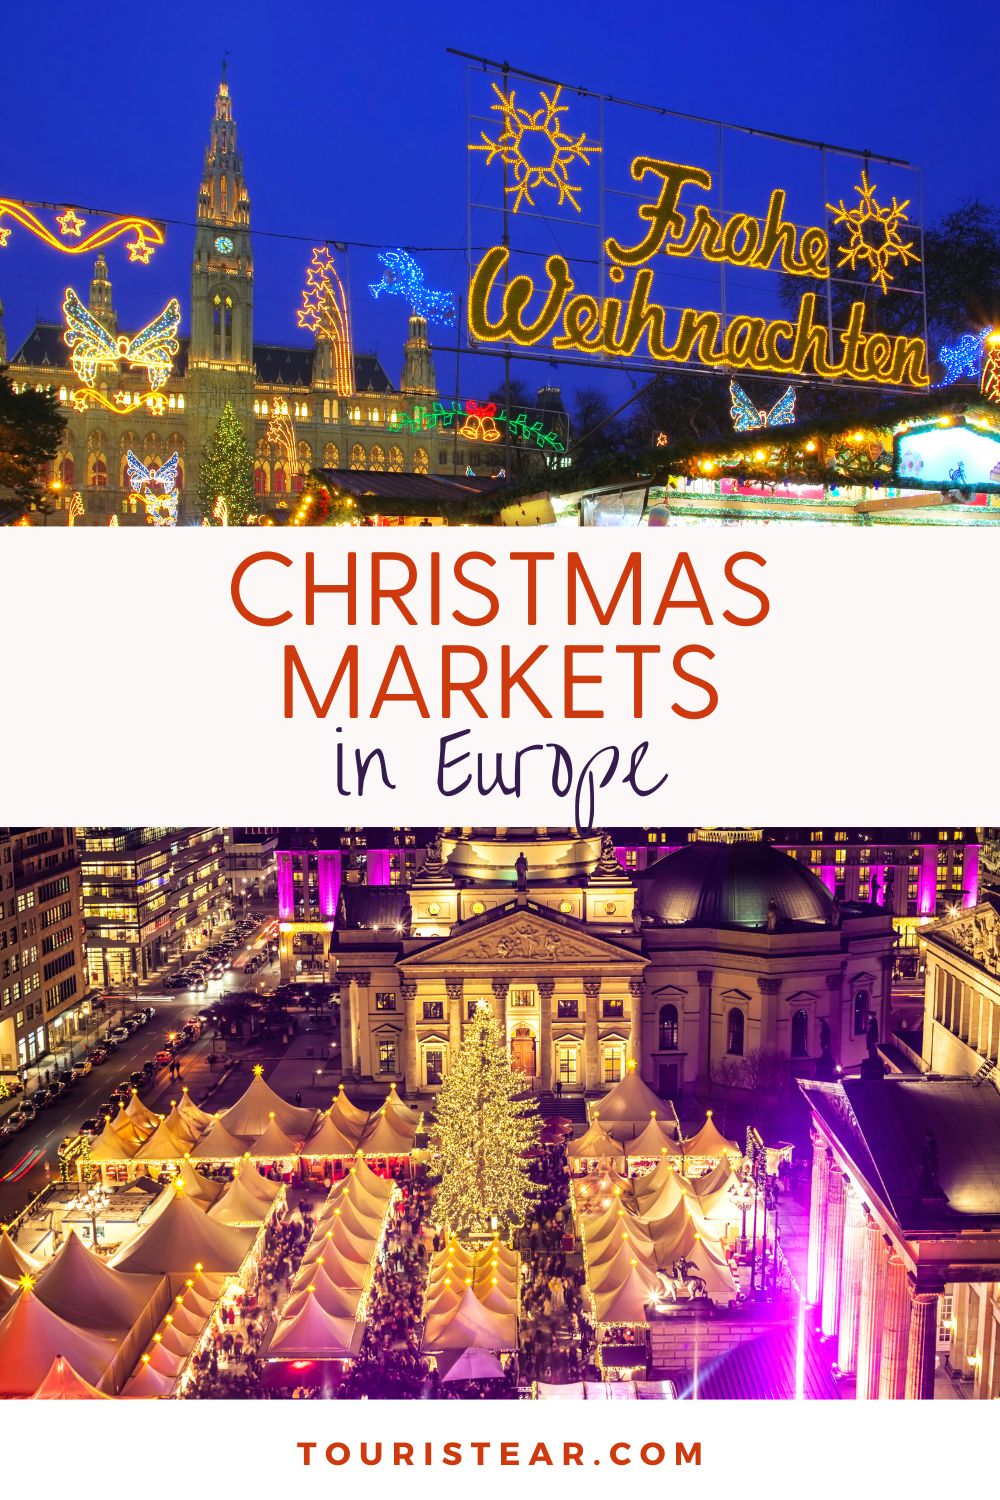 Christmas Markets in Europe Pinterest Featured Image 